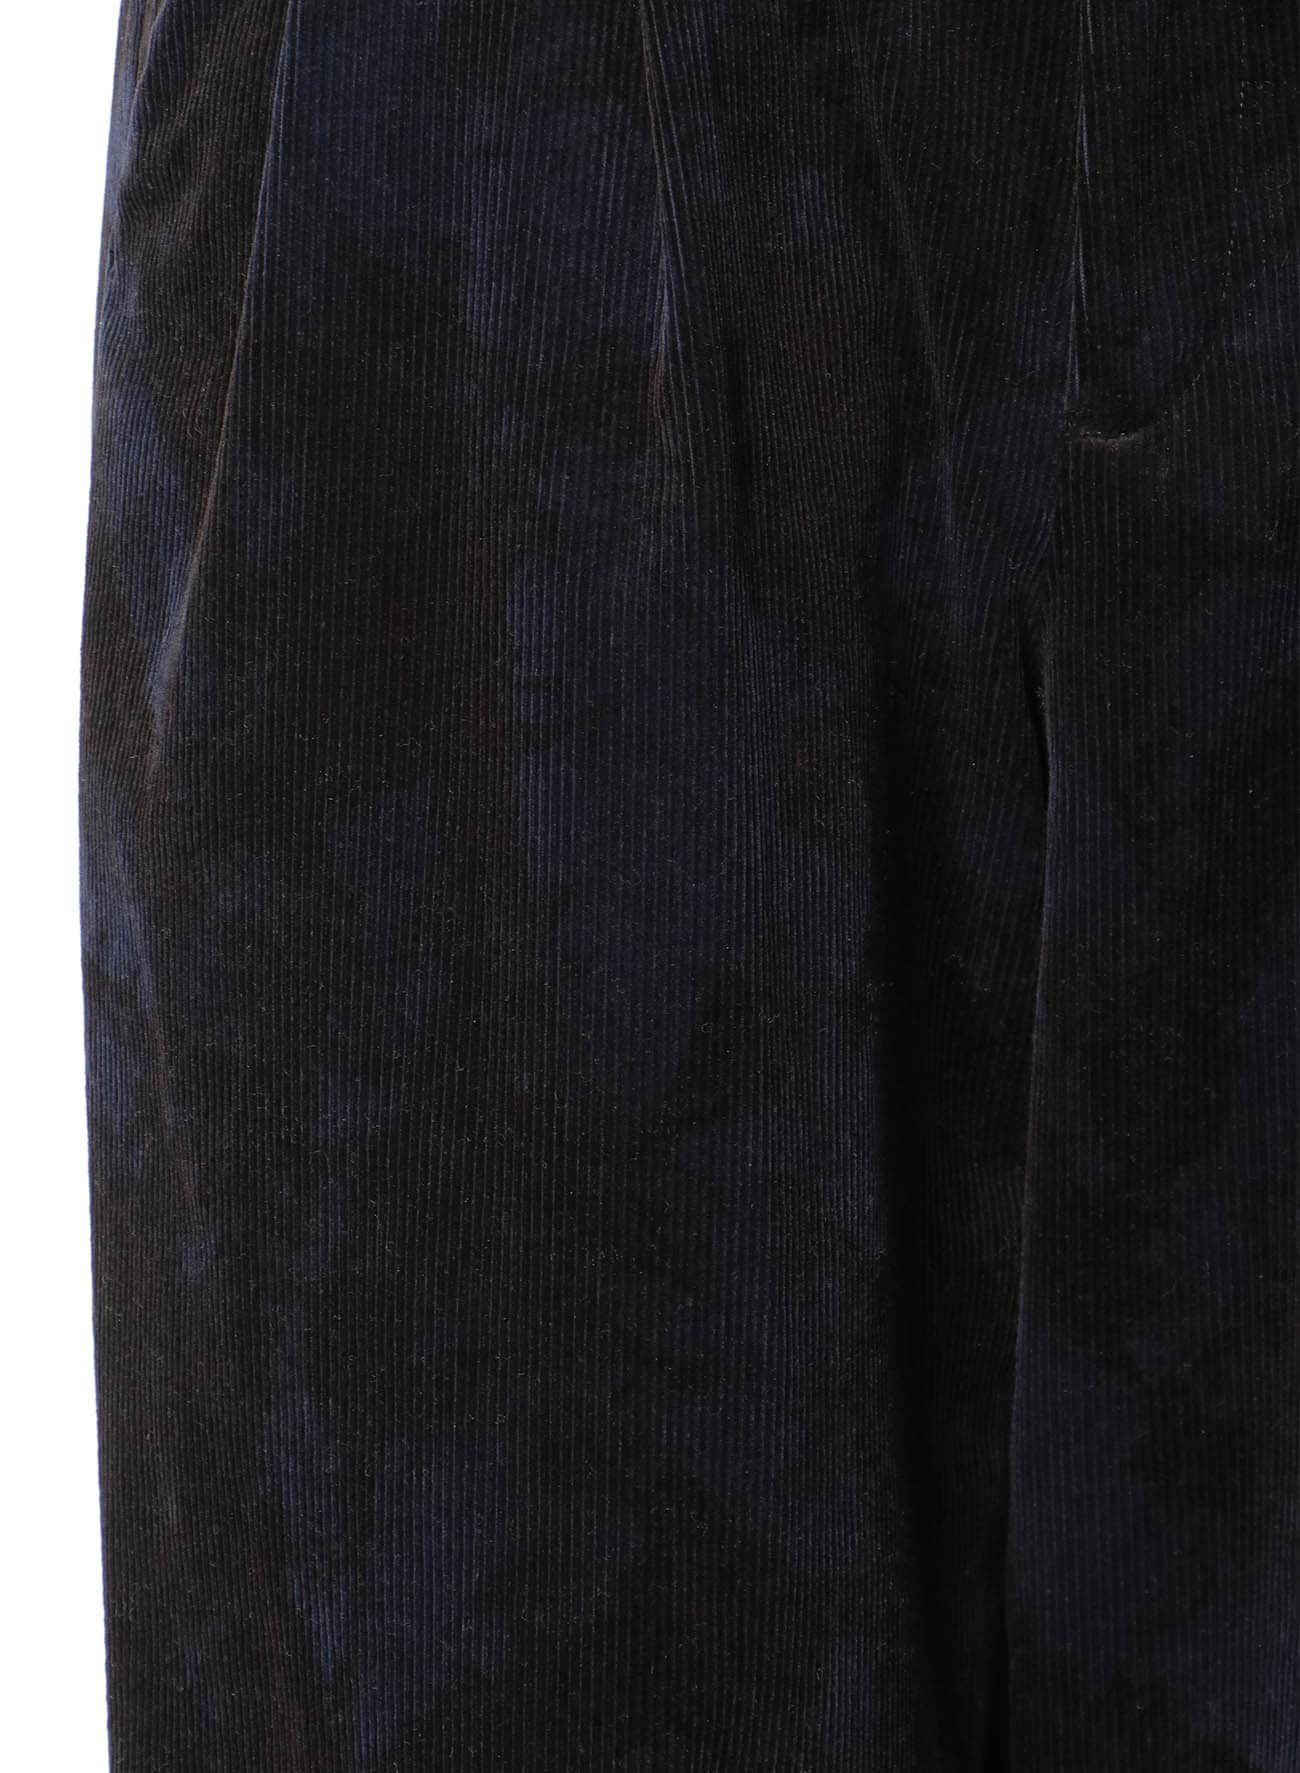 UNEVEN DYED CORDUROY 2 TUCK WIDE CUFFED PANTS